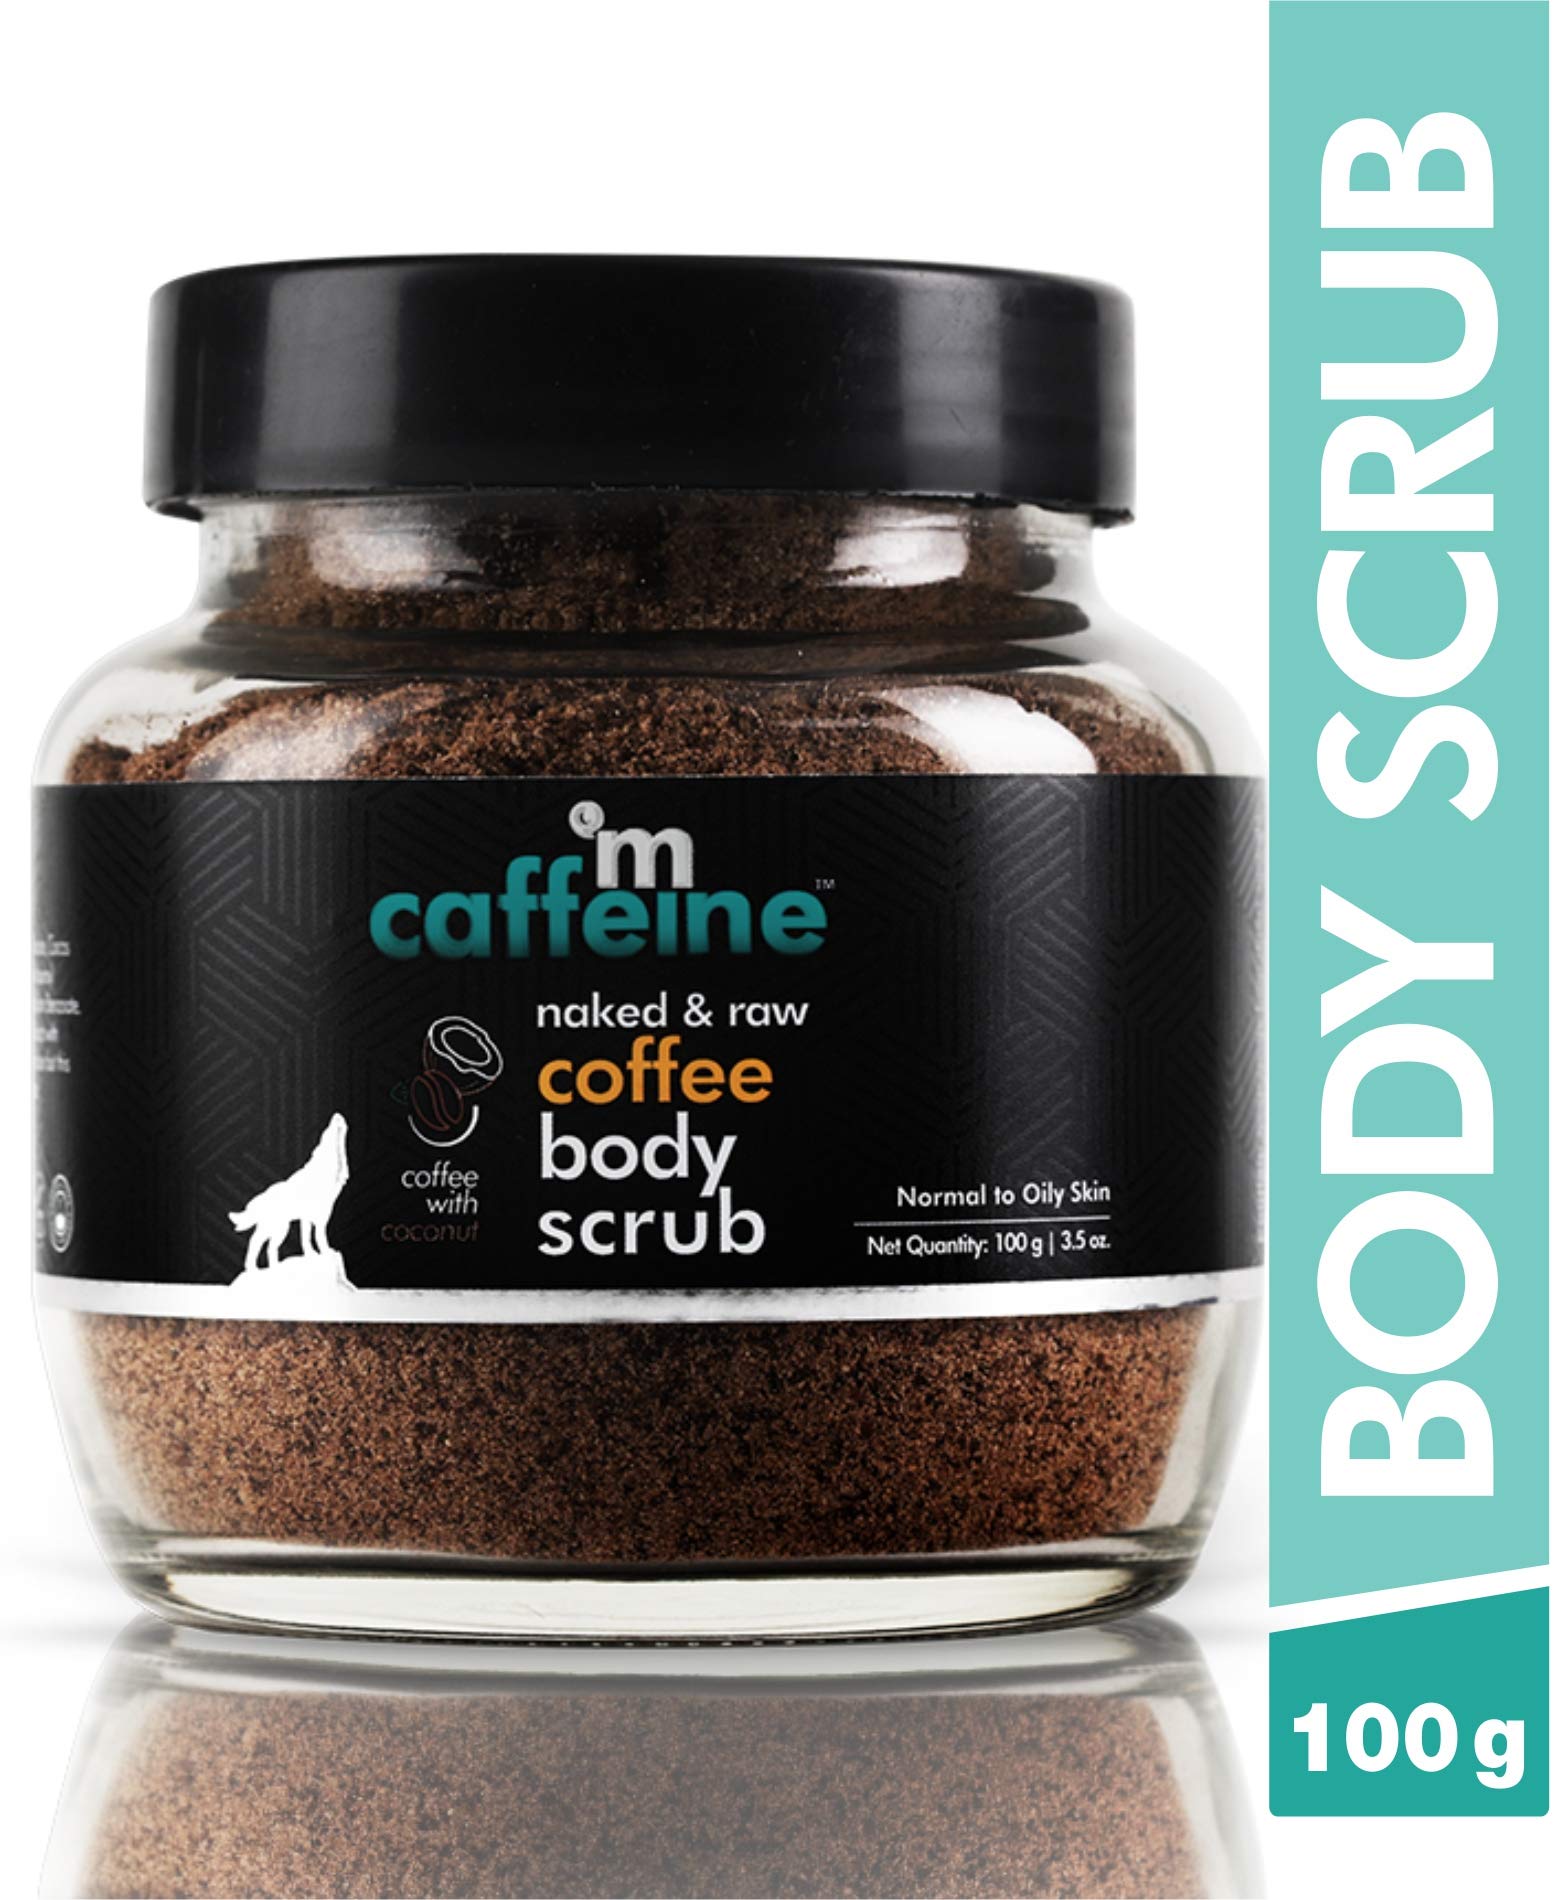 mCaffeine Exfoliating Coffee Body Scrub for Tan Removal & Soft-Smooth Skin | For Women & Men | De-Tan Bathing Scrub with Coconut Oil, Removes Dirt & Dead Skin from Neck, Knees, Elbows & Arms - 3.5 oz